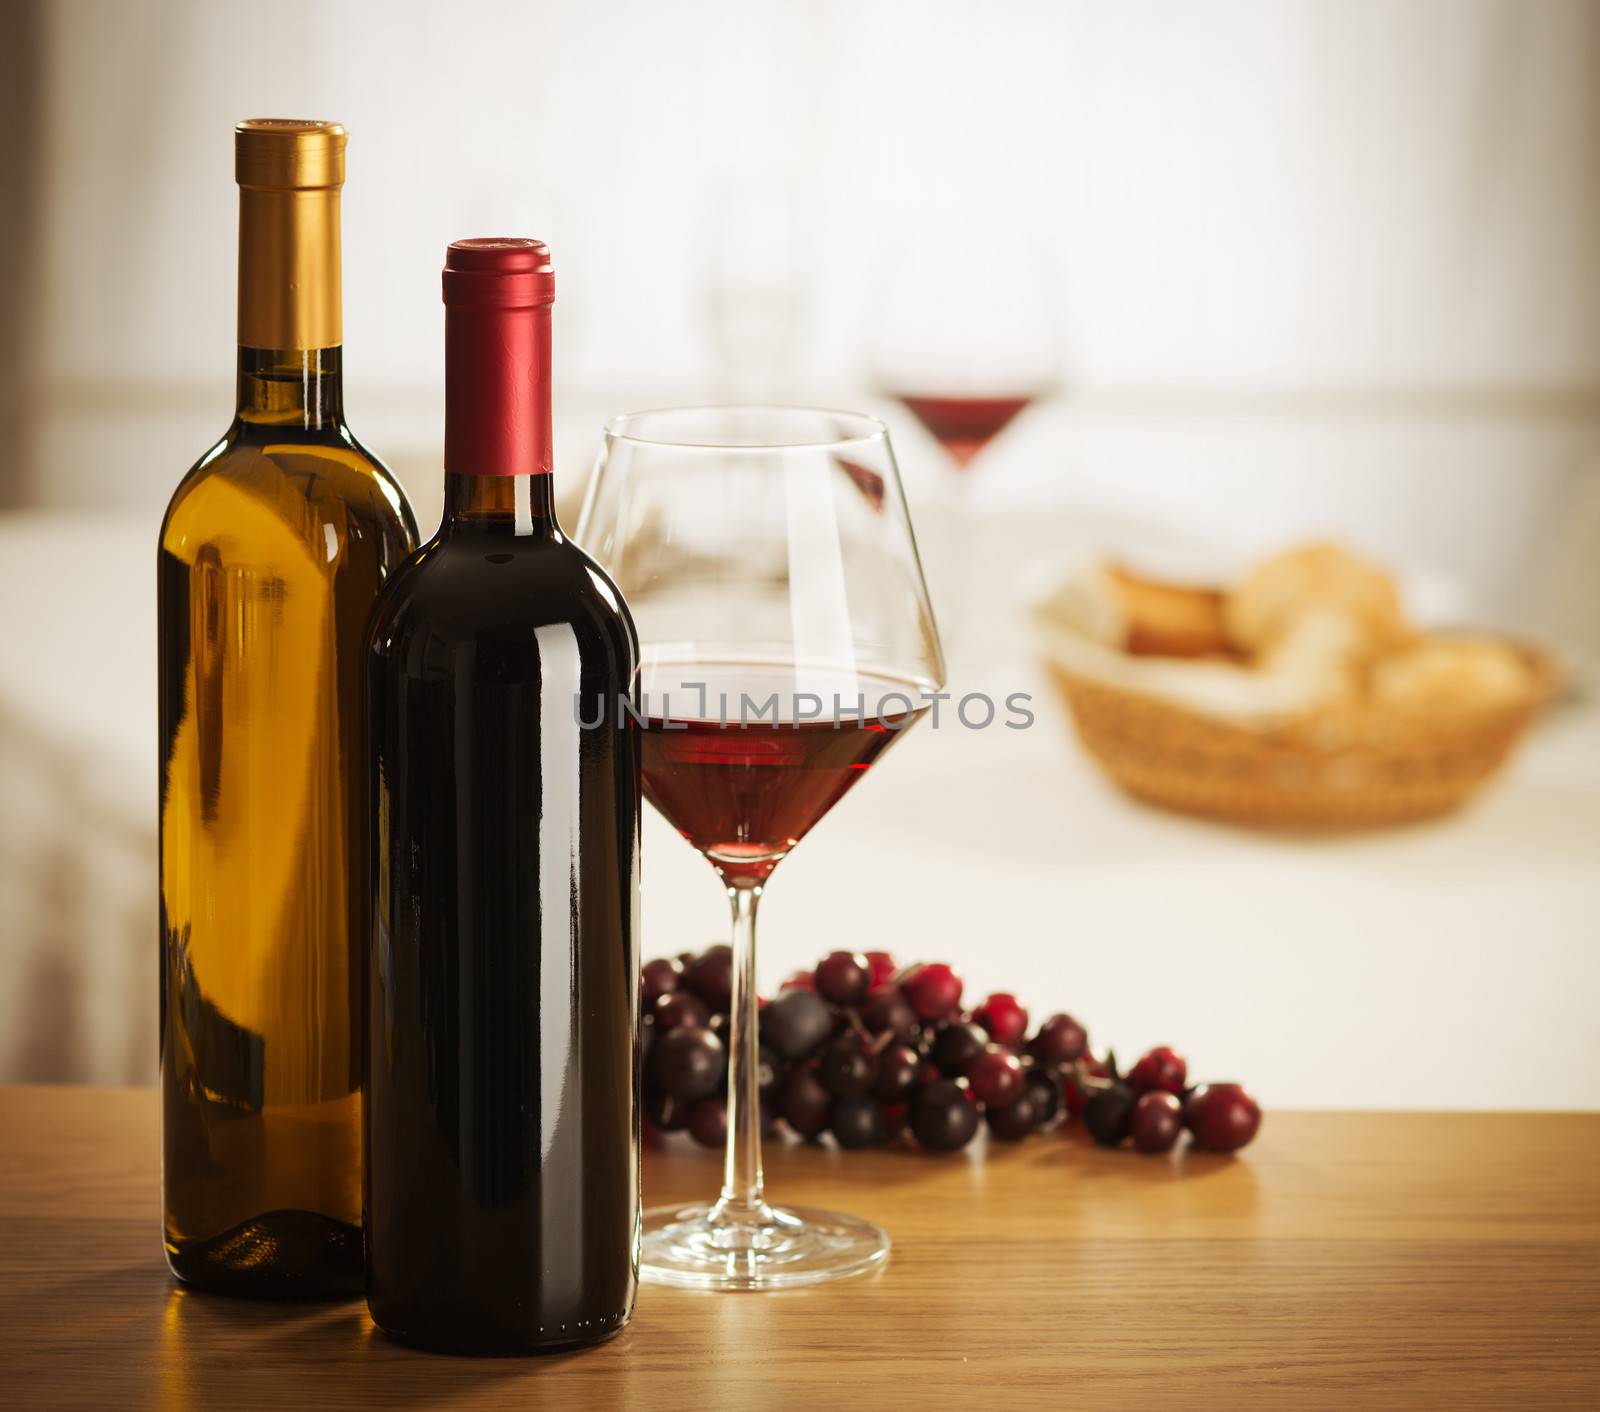 Red wine glass and bottle still life at restaurant.